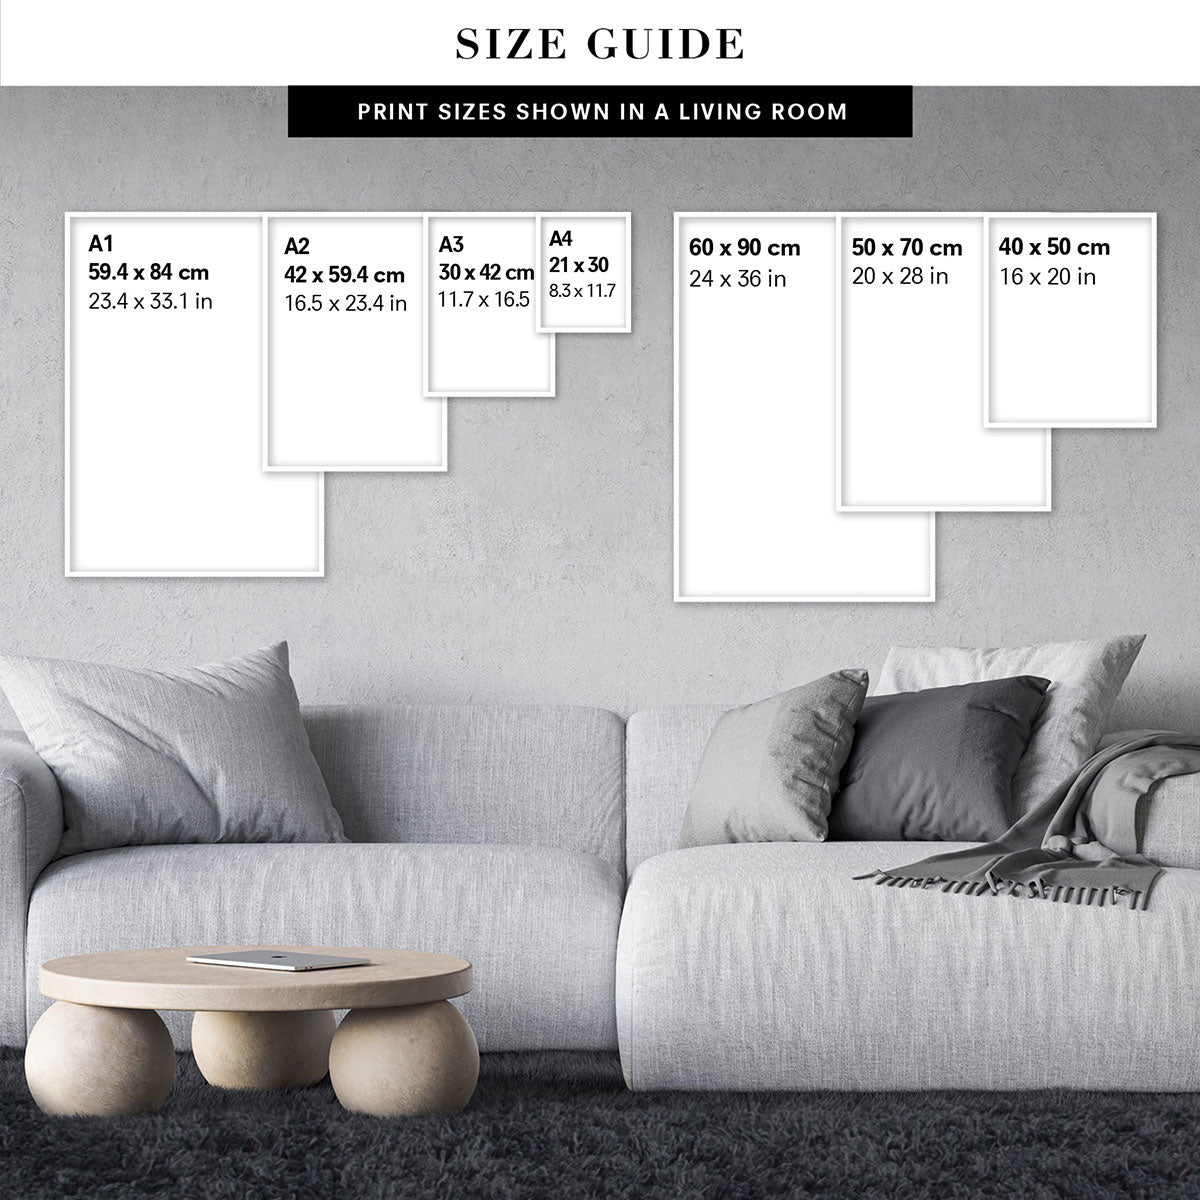 Print and Proper | Print Size Guide to help decide which size to select